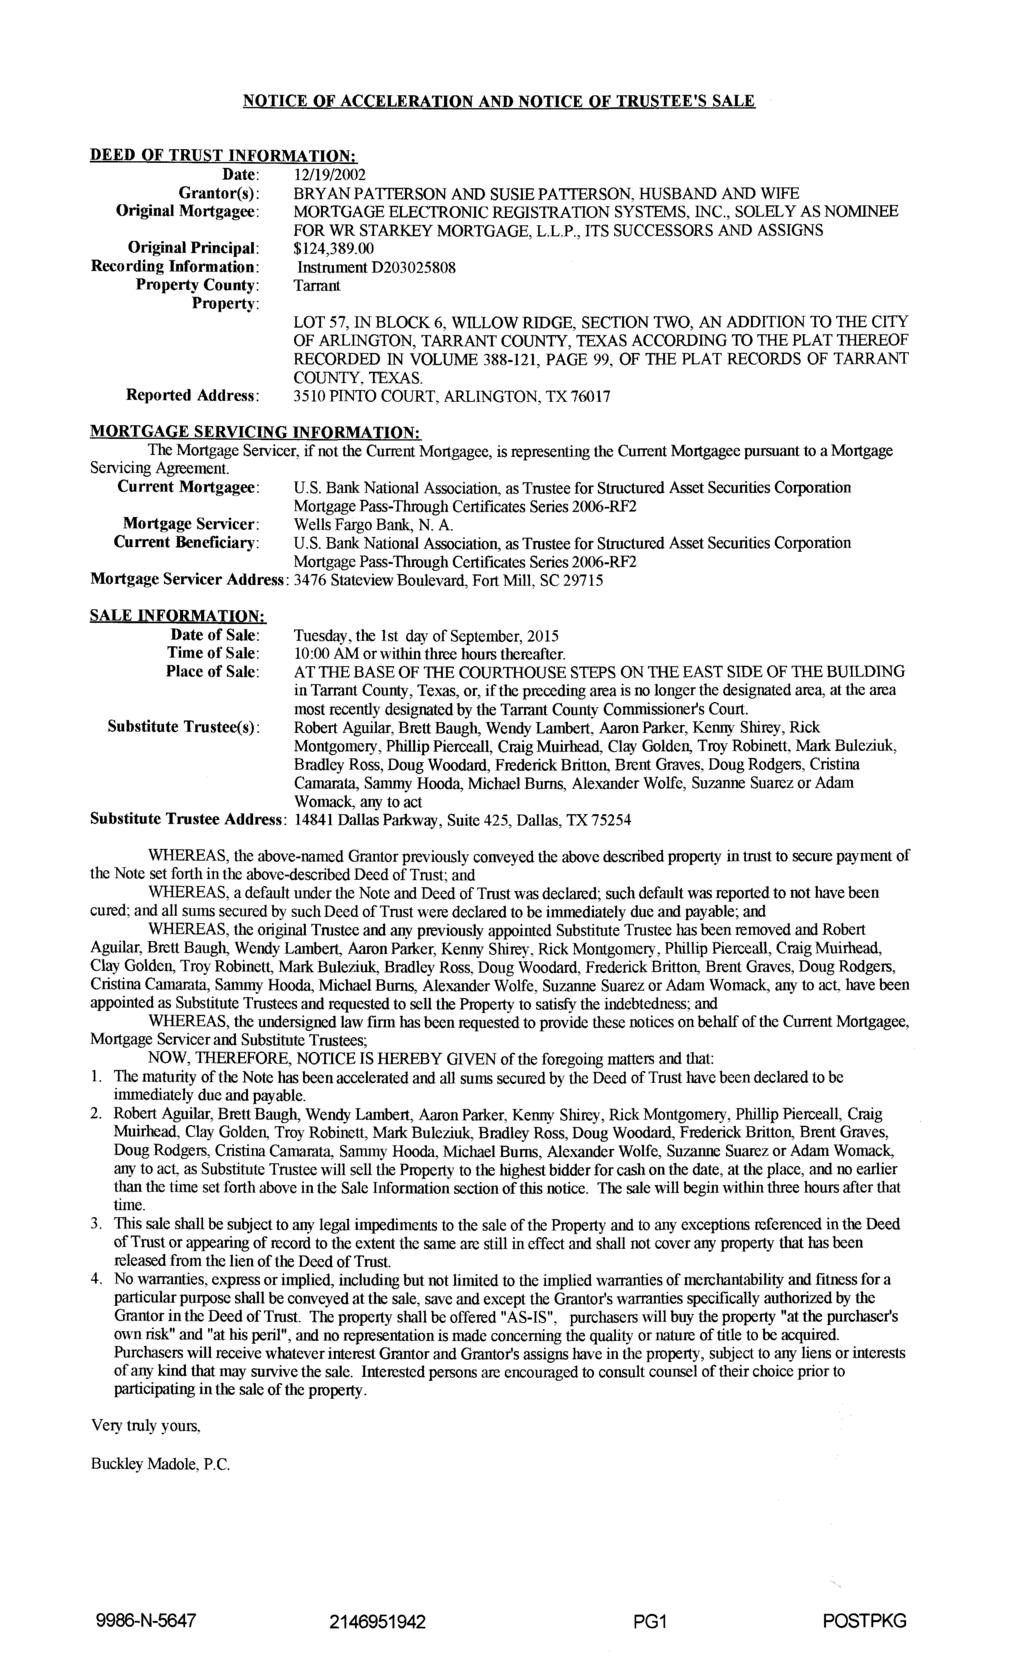 NOTICE OF ACCELERATION AND NOTICE OF TRUSTEE'S SALE DEED OF TRUST INFORMATION: Date: 12/19/2002 Grantor(s): BRYANPAITERSON AND SUSIEPAITERSON, HUSBAND AND WIFE Original Mortgagee: MORTGAGE ELECTRONIC